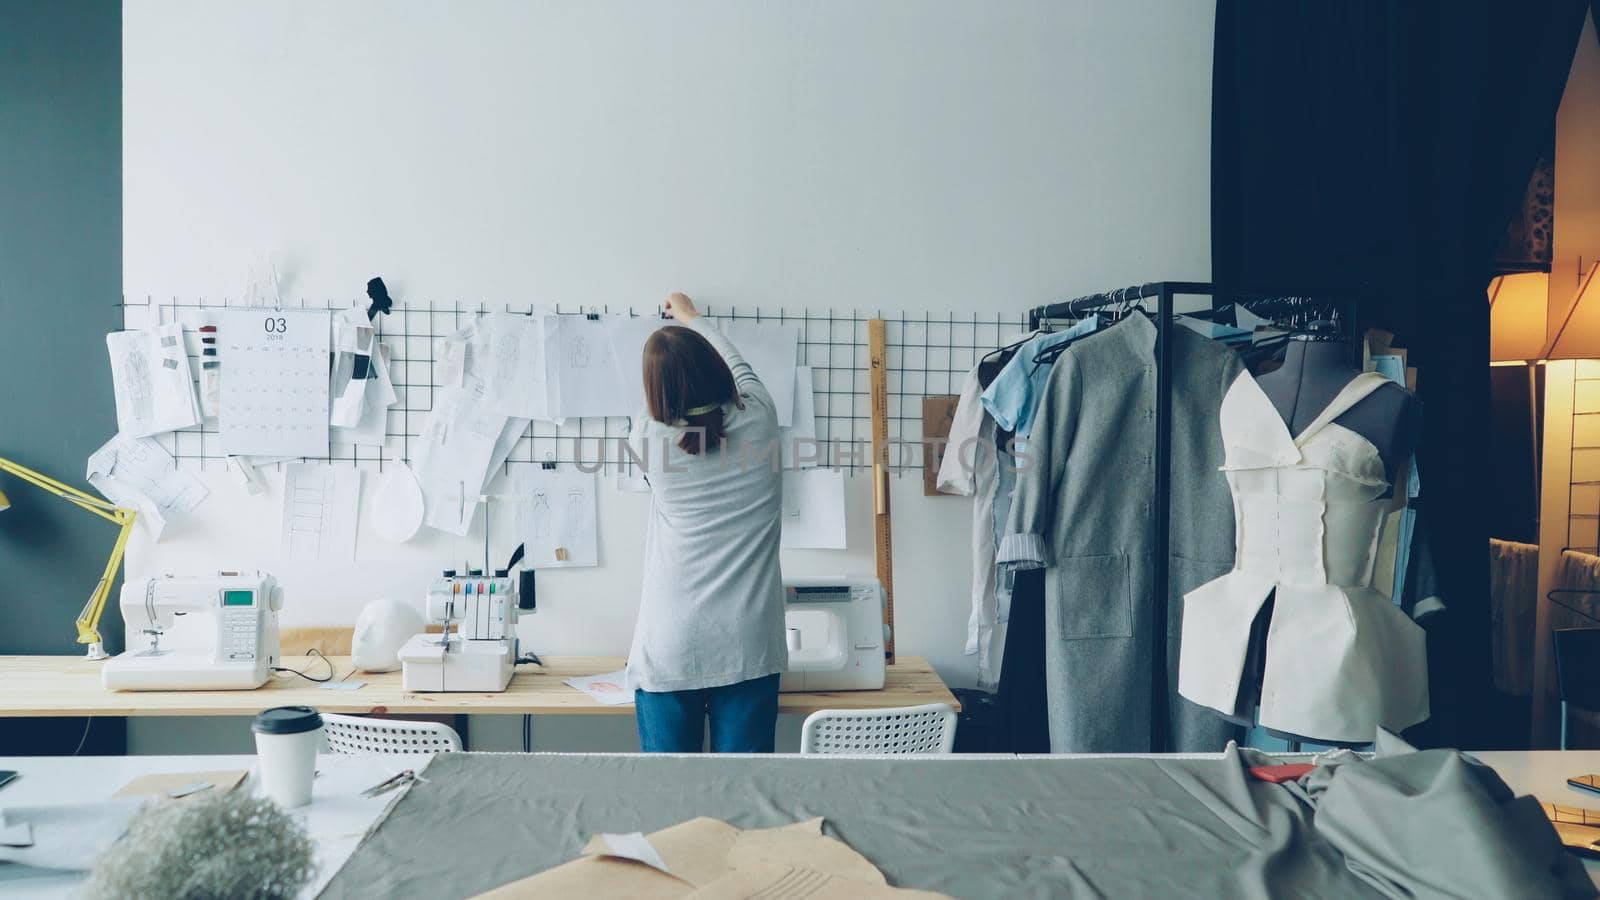 Female fashion designer is choosing and hanging clothing sketches to wall for her newest collection, then watching them carefully. Light fabrics, clothes hanging and sewing items are visible.